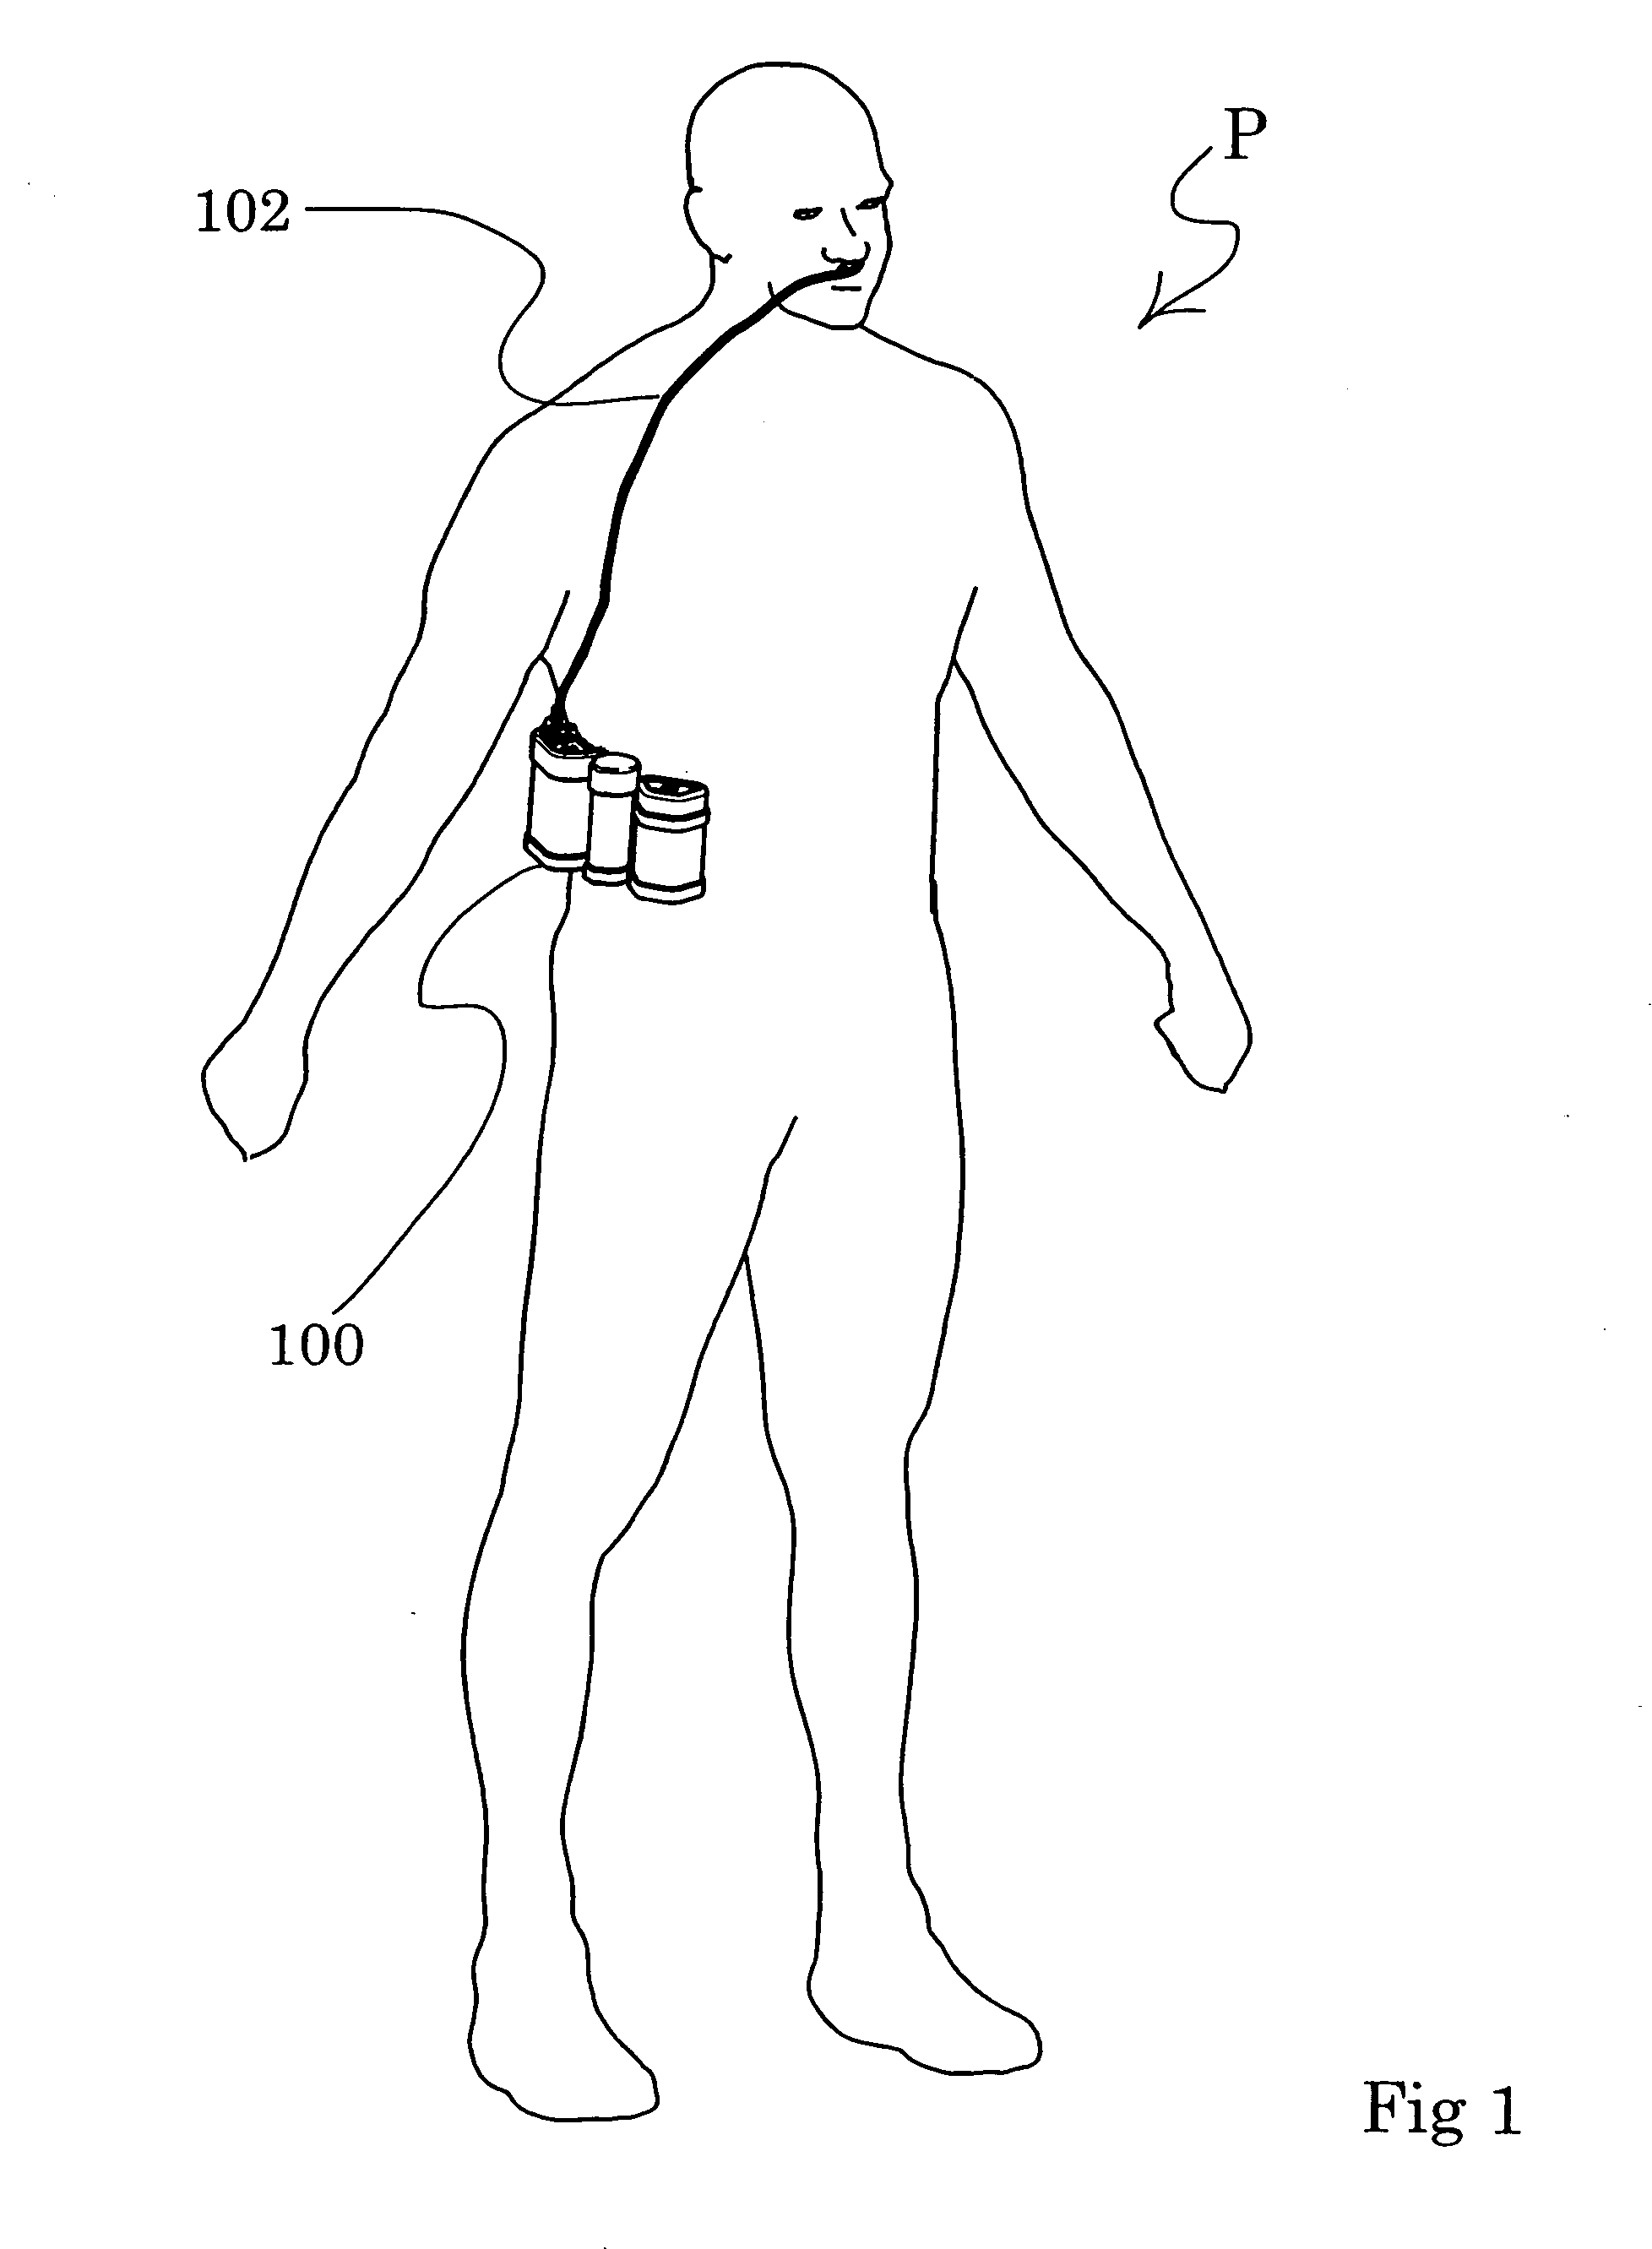 Ambulatory oxygen concentrator containing a three phase vacuum separation system